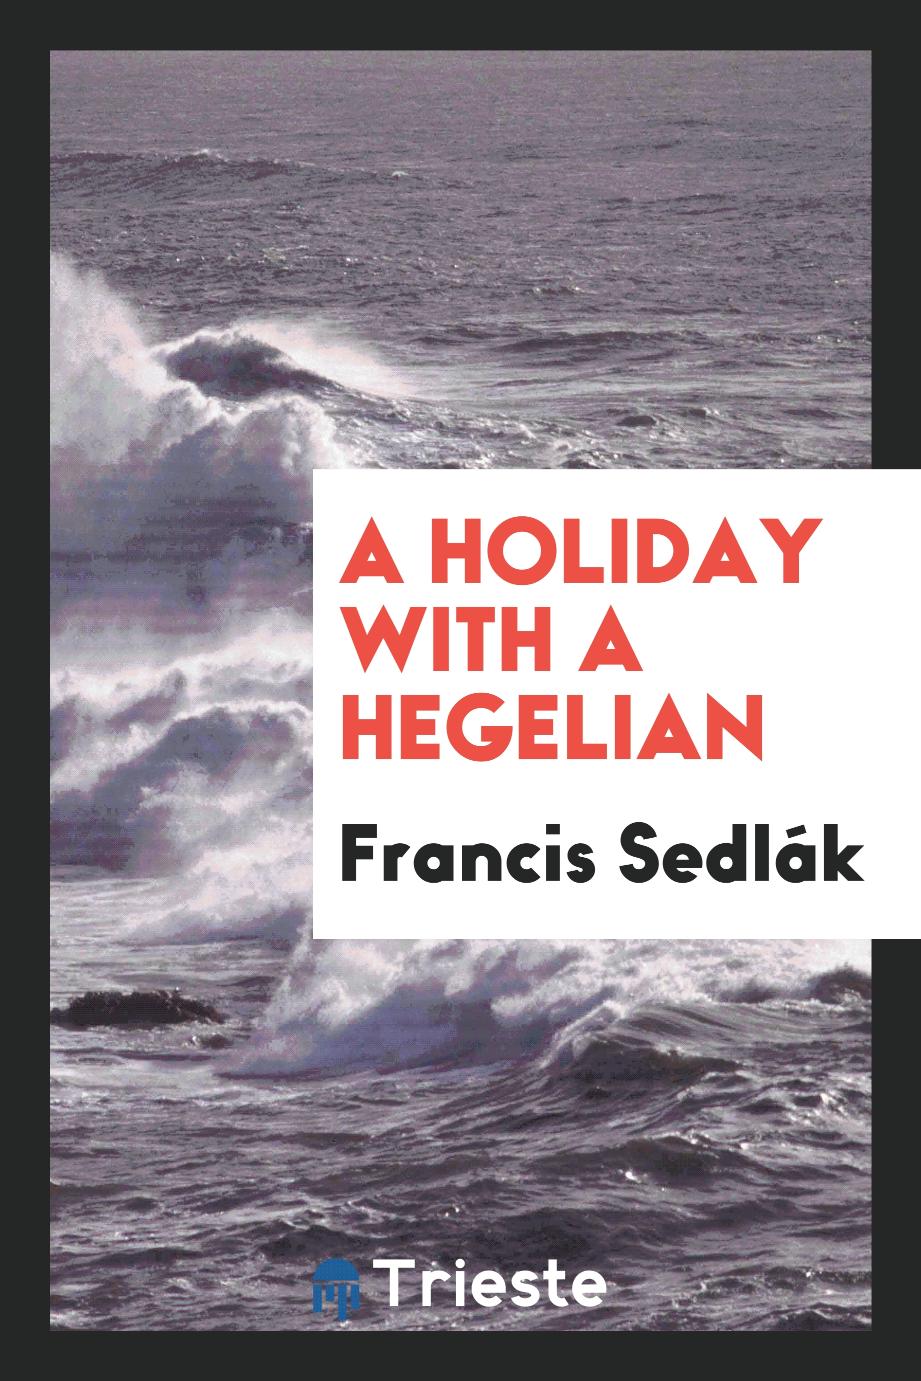 A holiday with a Hegelian